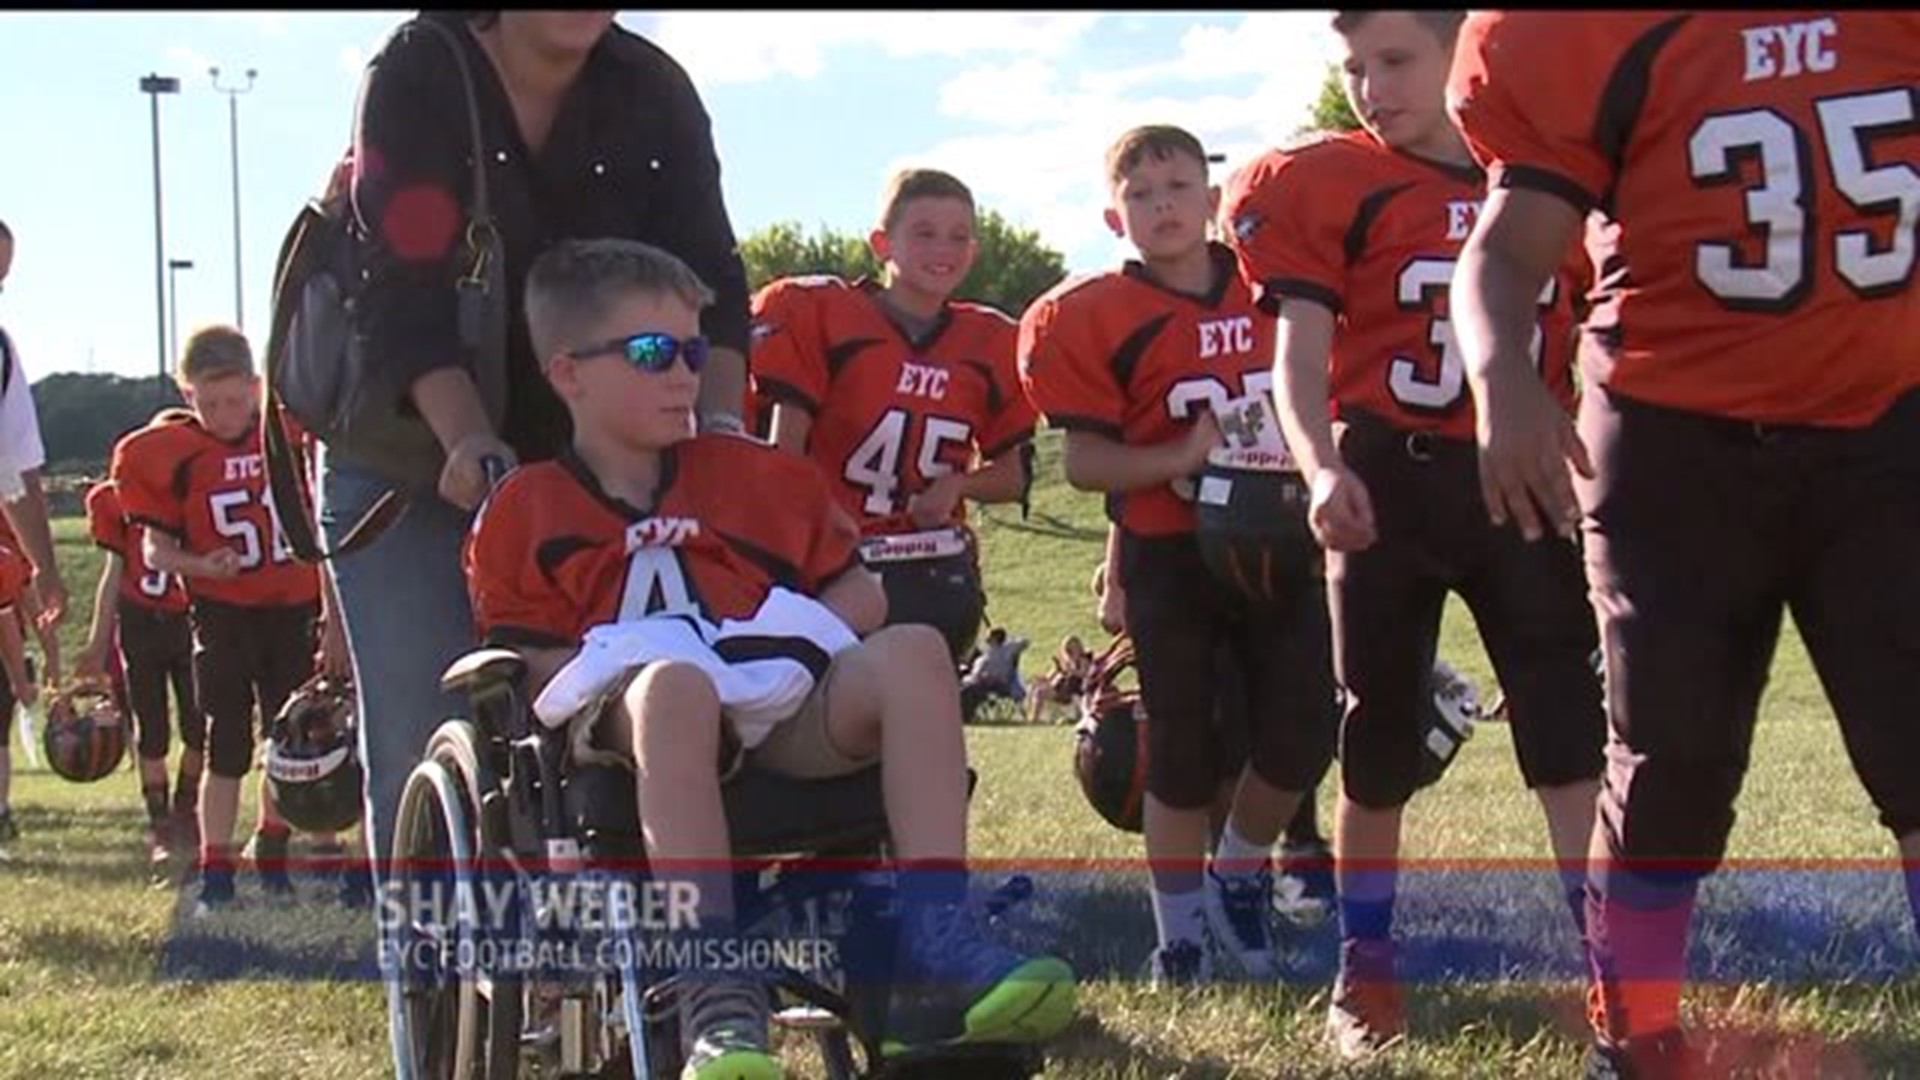 Community supports 9-year-old with brain tumors